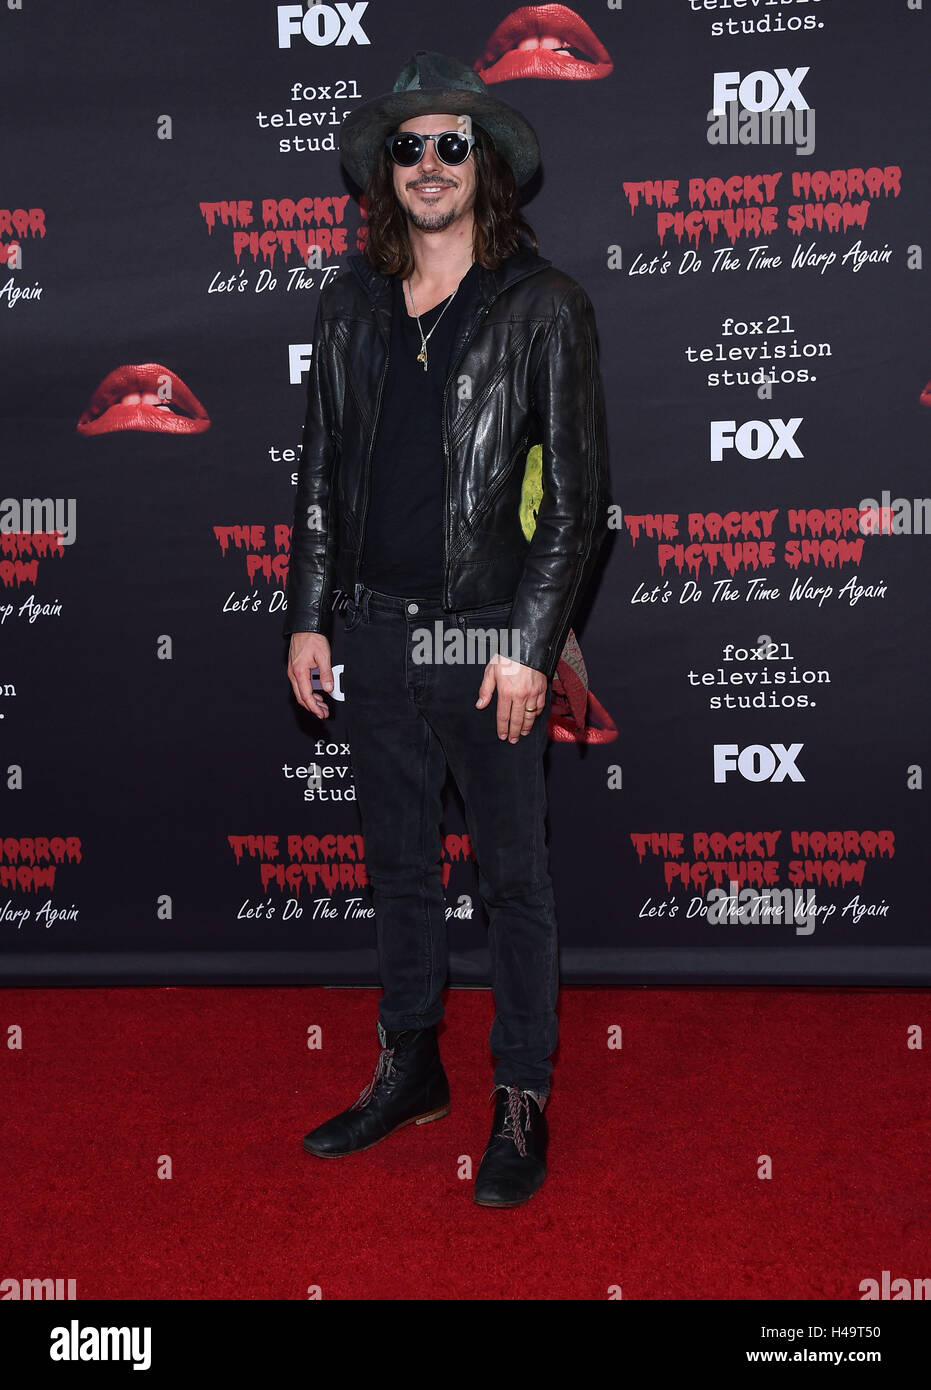 West Hollywood, California, USA. 13th Oct, 2016. Cisco Adler arrives for the premiere of ''The Rocky Horror Picture Show; Let's Do The Time Warp Again'' Premiere at the Roxy theater. Credit:  Lisa O'Connor/ZUMA Wire/Alamy Live News Stock Photo